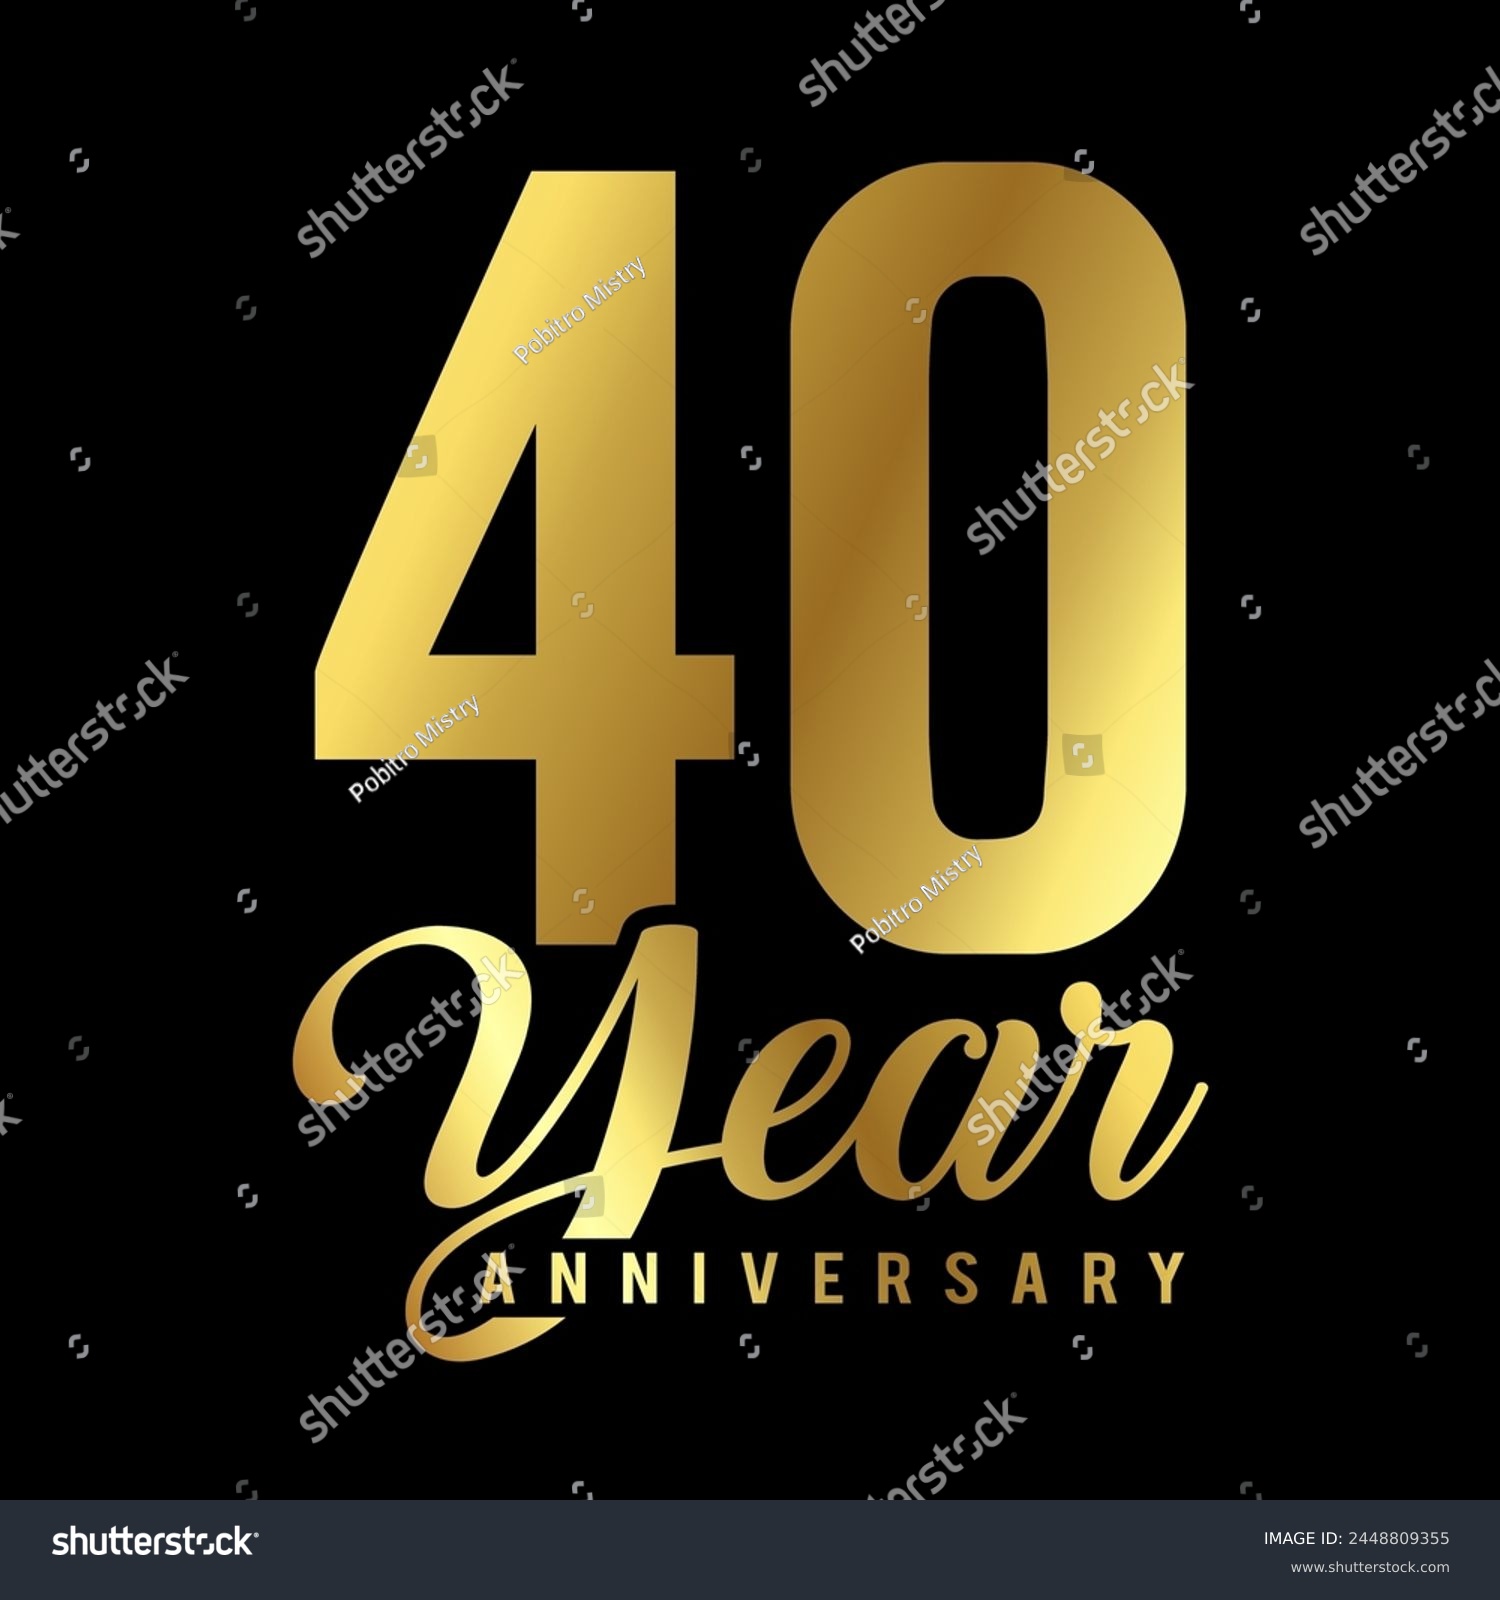 SVG of 40 years anniversary or birthday card with golden color vector illustration. svg